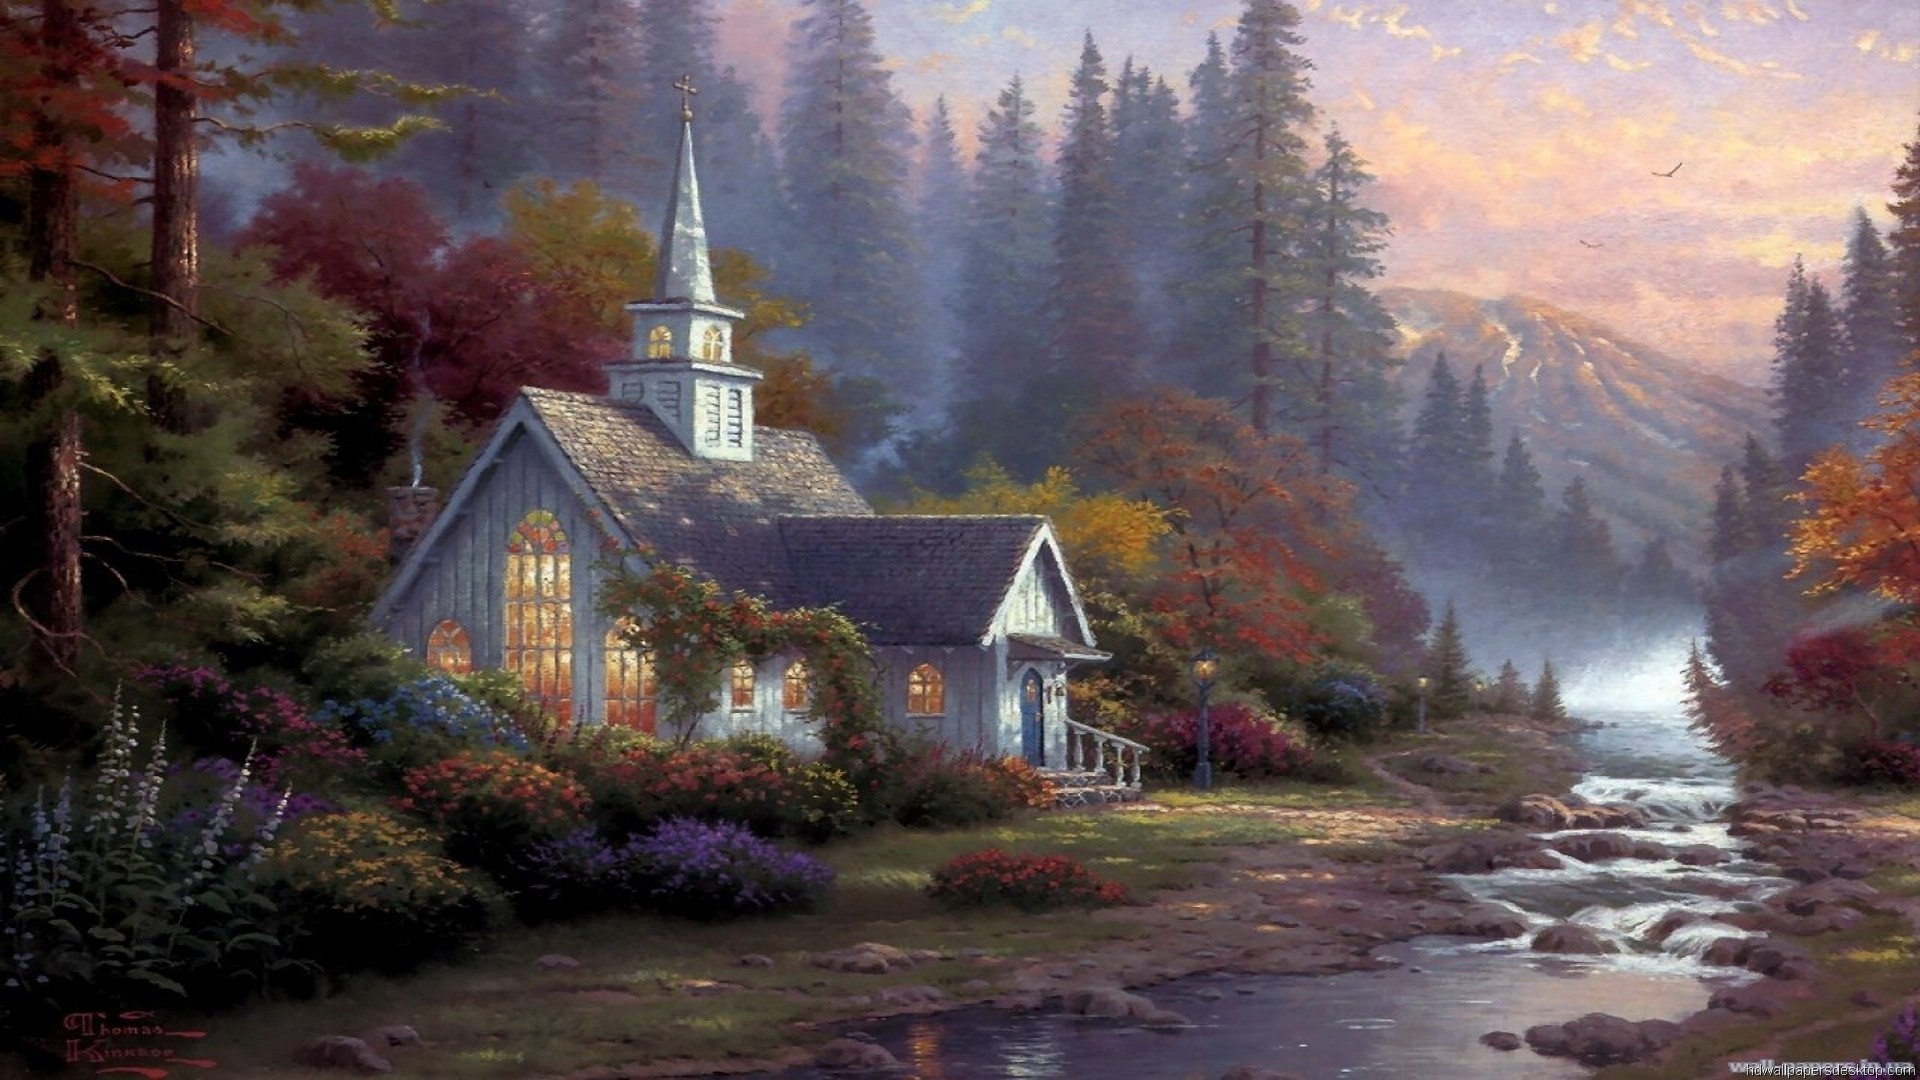 1920x1080 ... Great Thomas Kinkade Wallpaper Download free wallpapers and desktop  backgrounds in a variety of screen resolutions